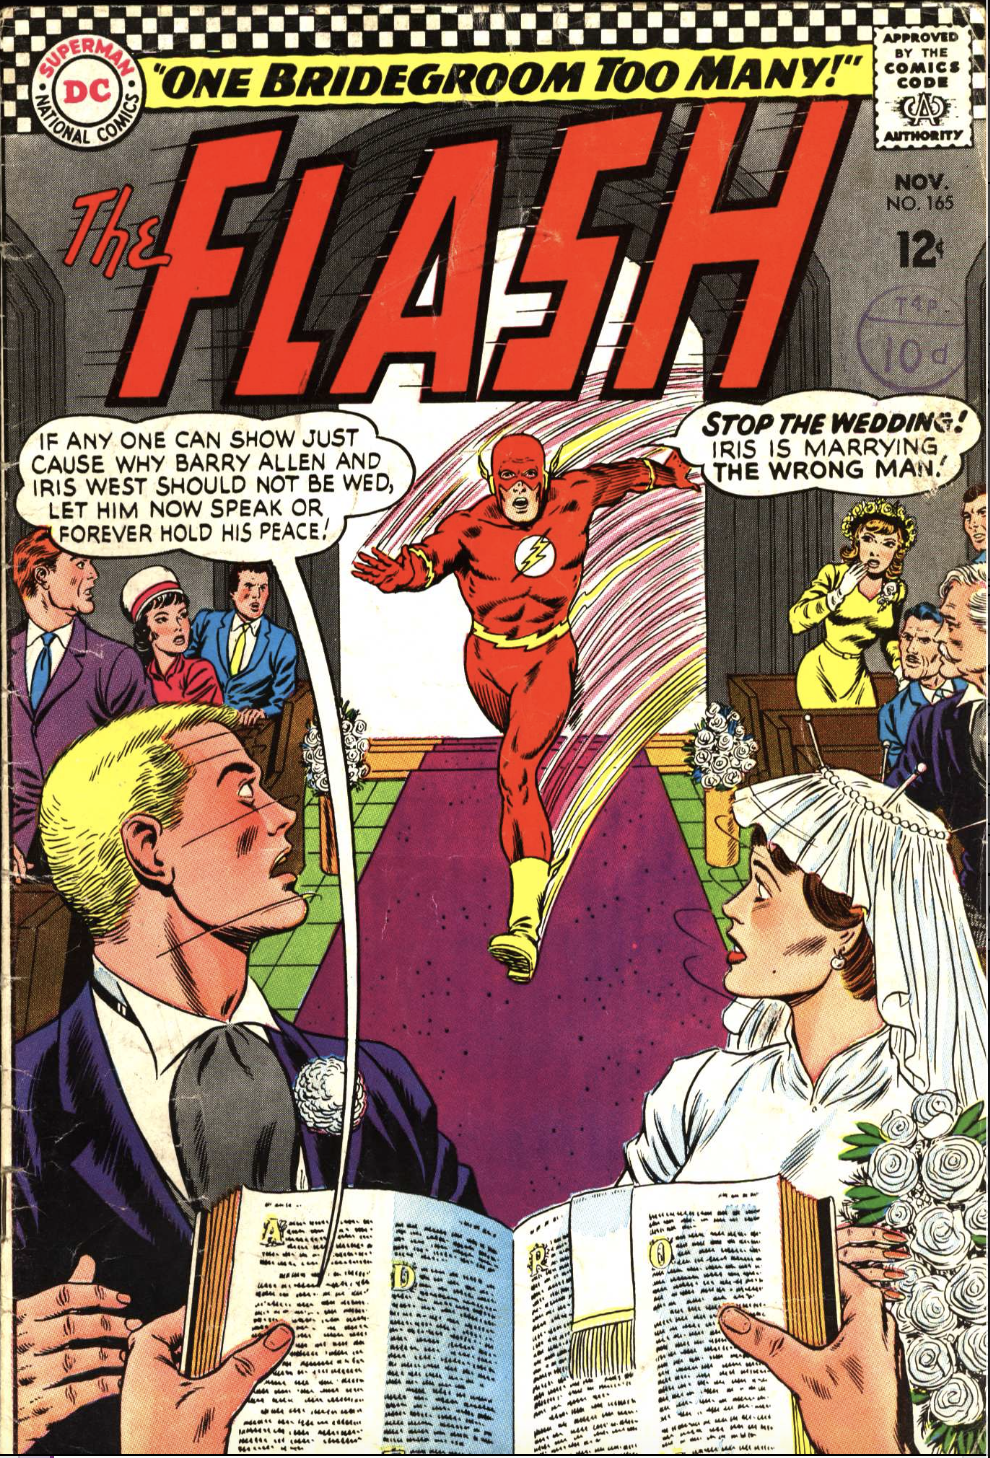 Goin' to the Chap-Hell (Flash 165)